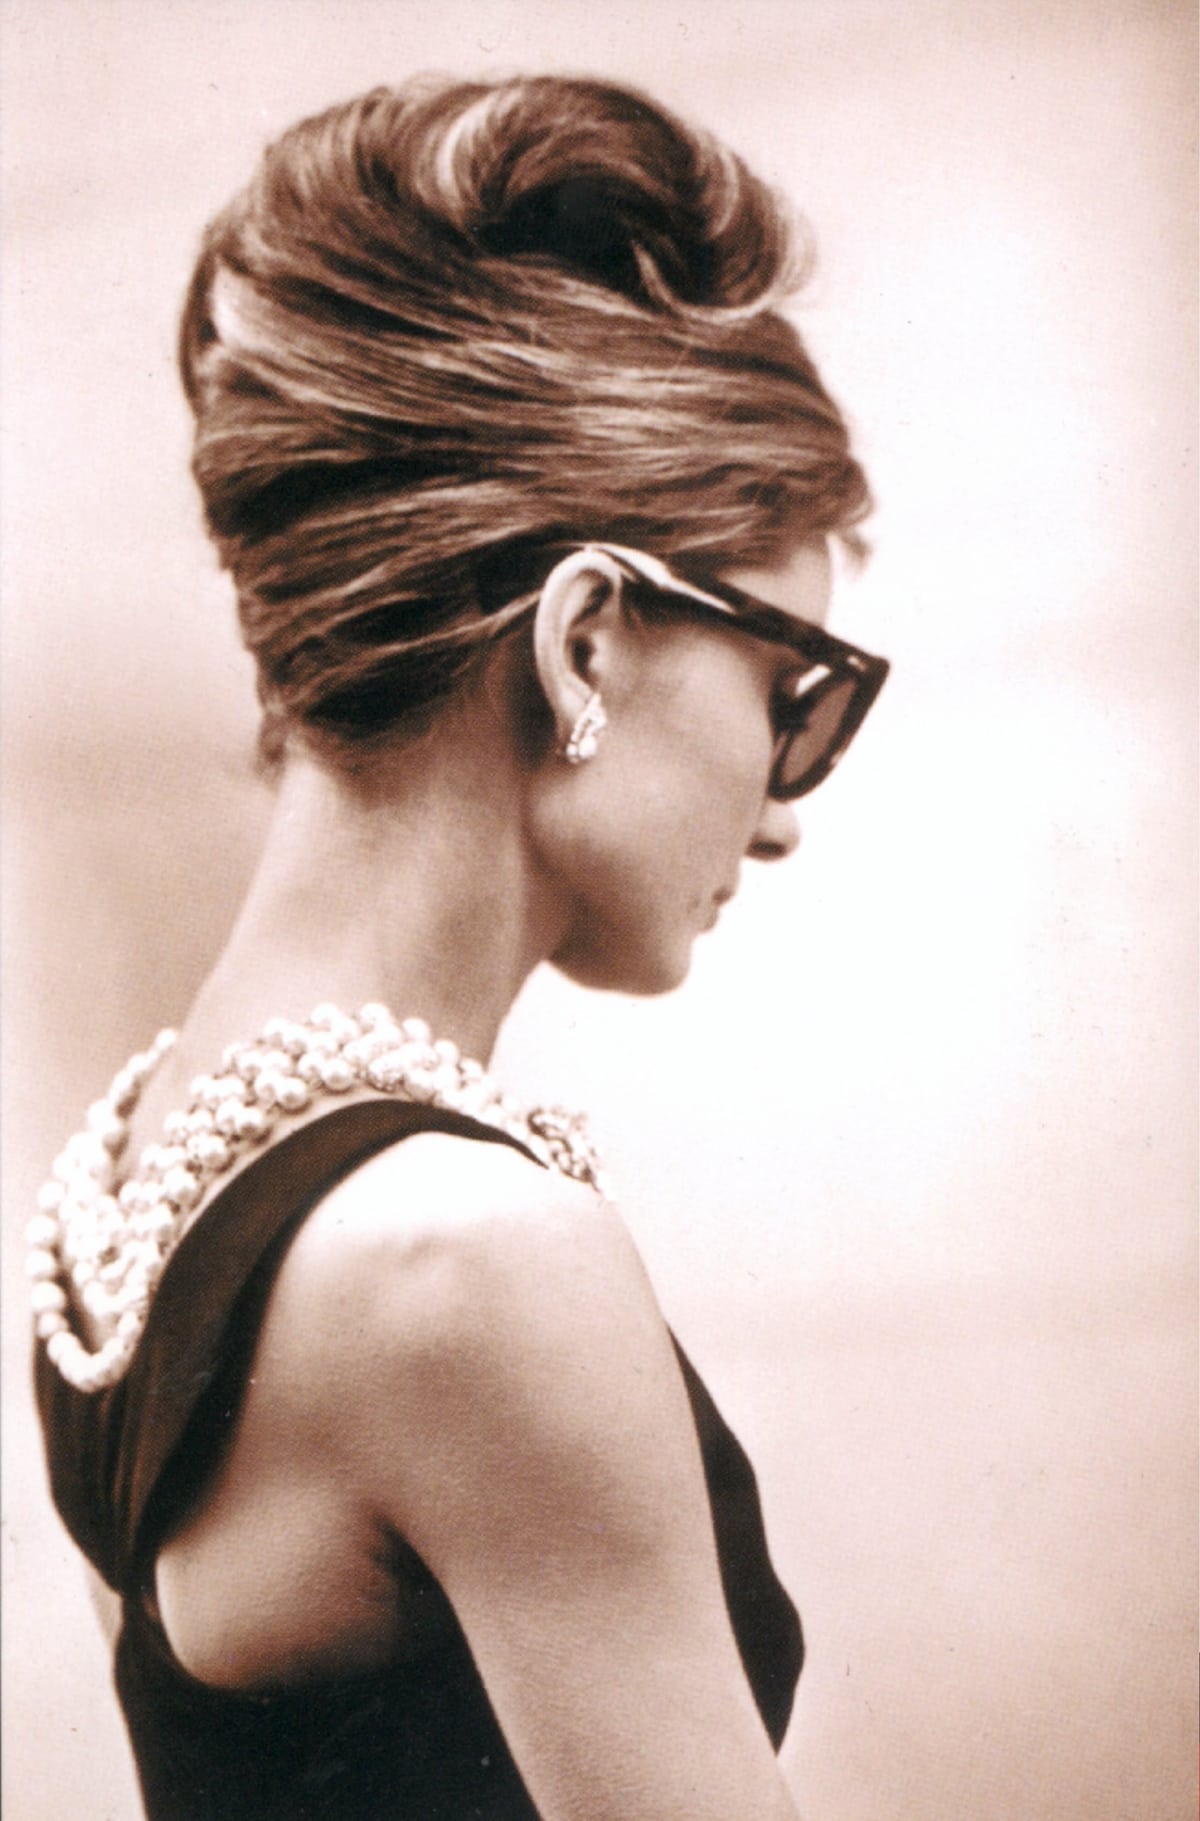 Audrey Hepburn as Holly Golightly wears a backdrop necklace in the 1961 American romantic comedy film Breakfast at Tiffany's